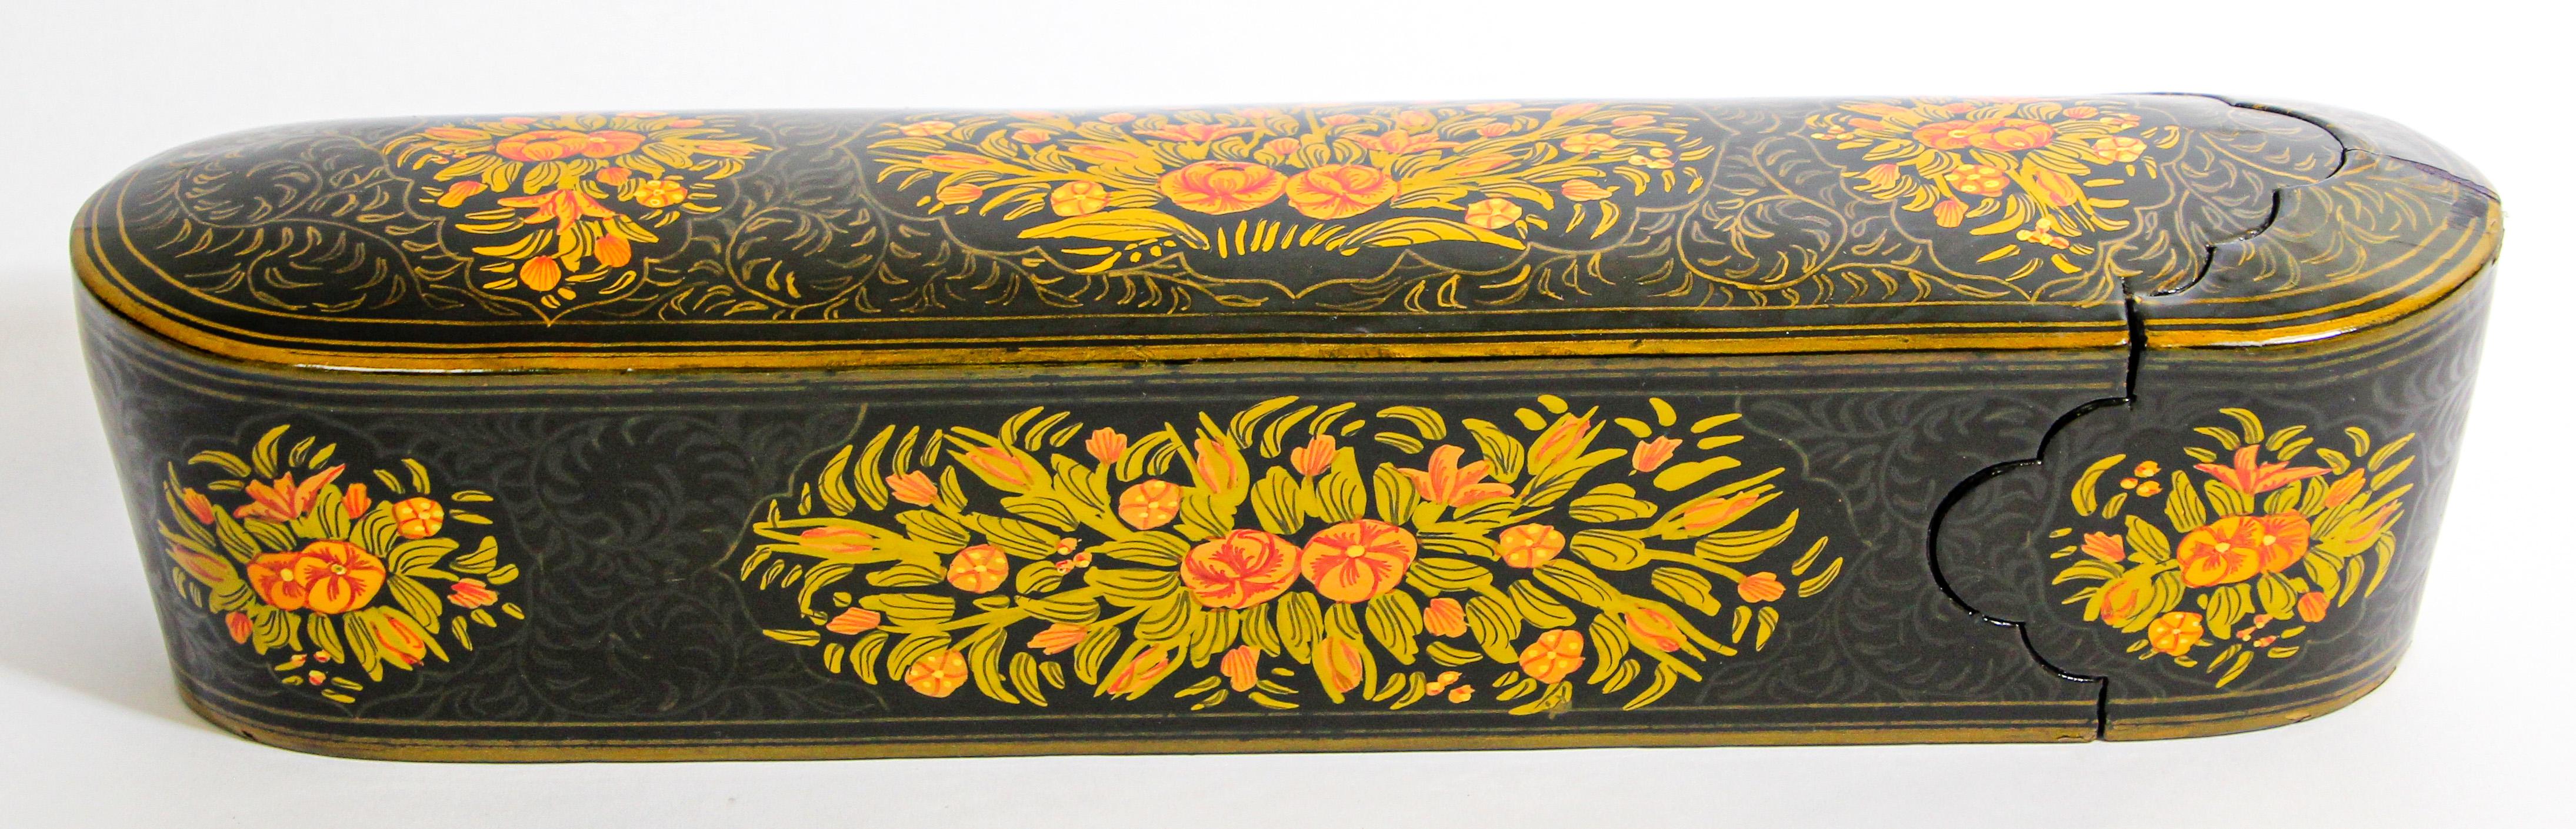 Indo Persian large hand painted lacquer pen box in rectangular shape.
Decorated with floral designs on black background.
Moorish pen box papier maché with painting in the style of Muhammad Hasan, Qajar Persia.
Size is 14.5